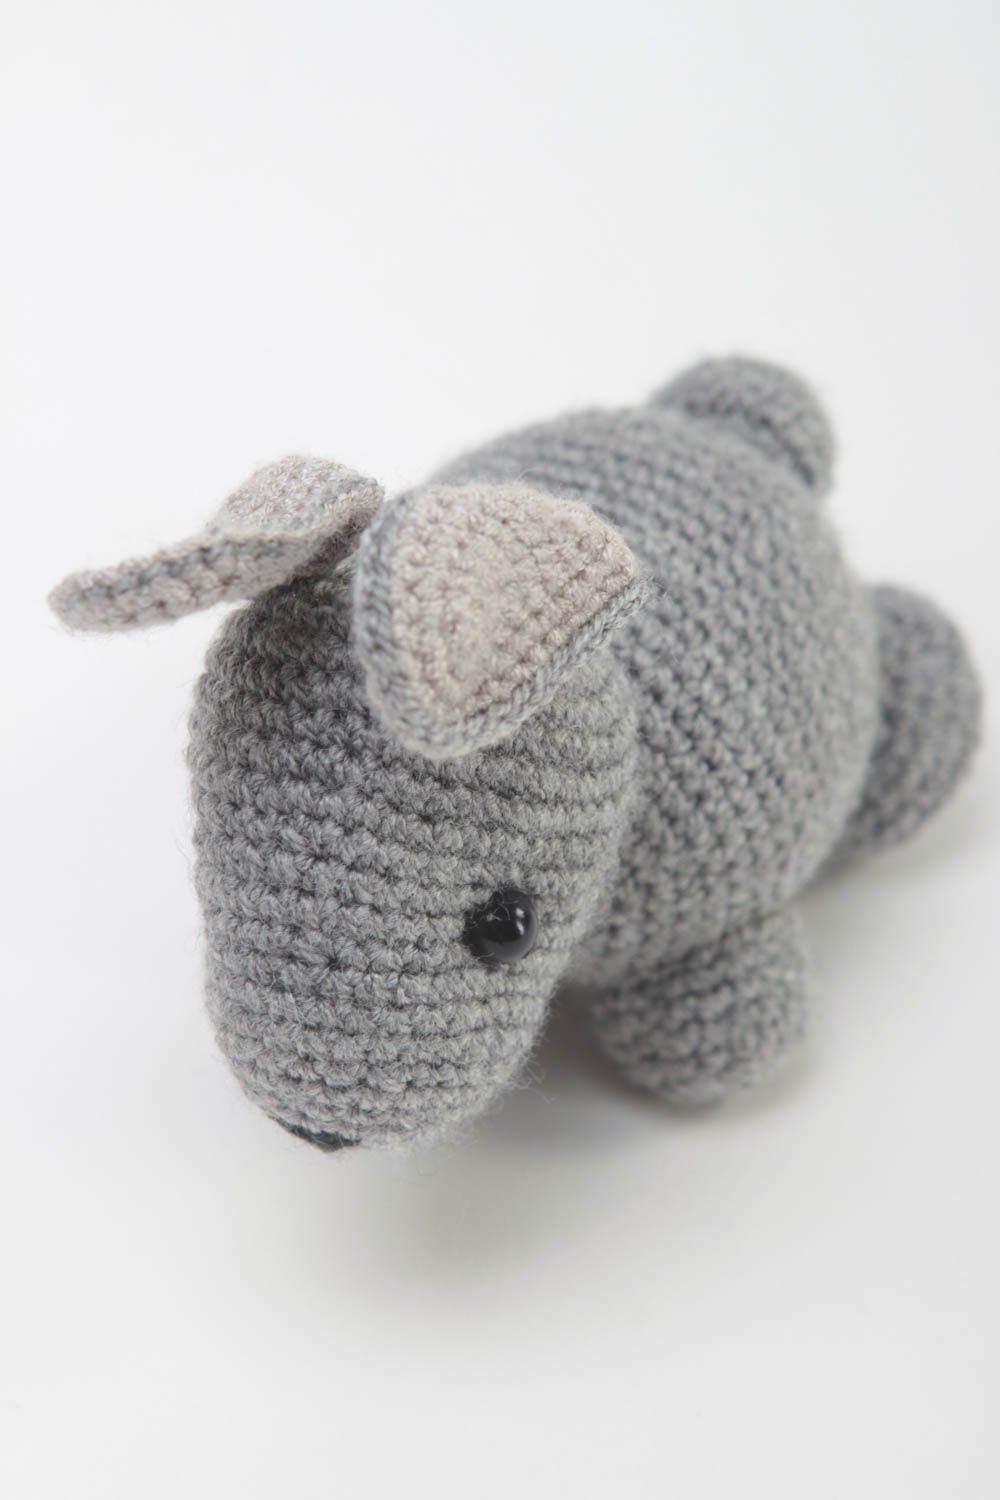 Crocheted handmade soft toy cute gifts for children animal toy rabbit photo 2